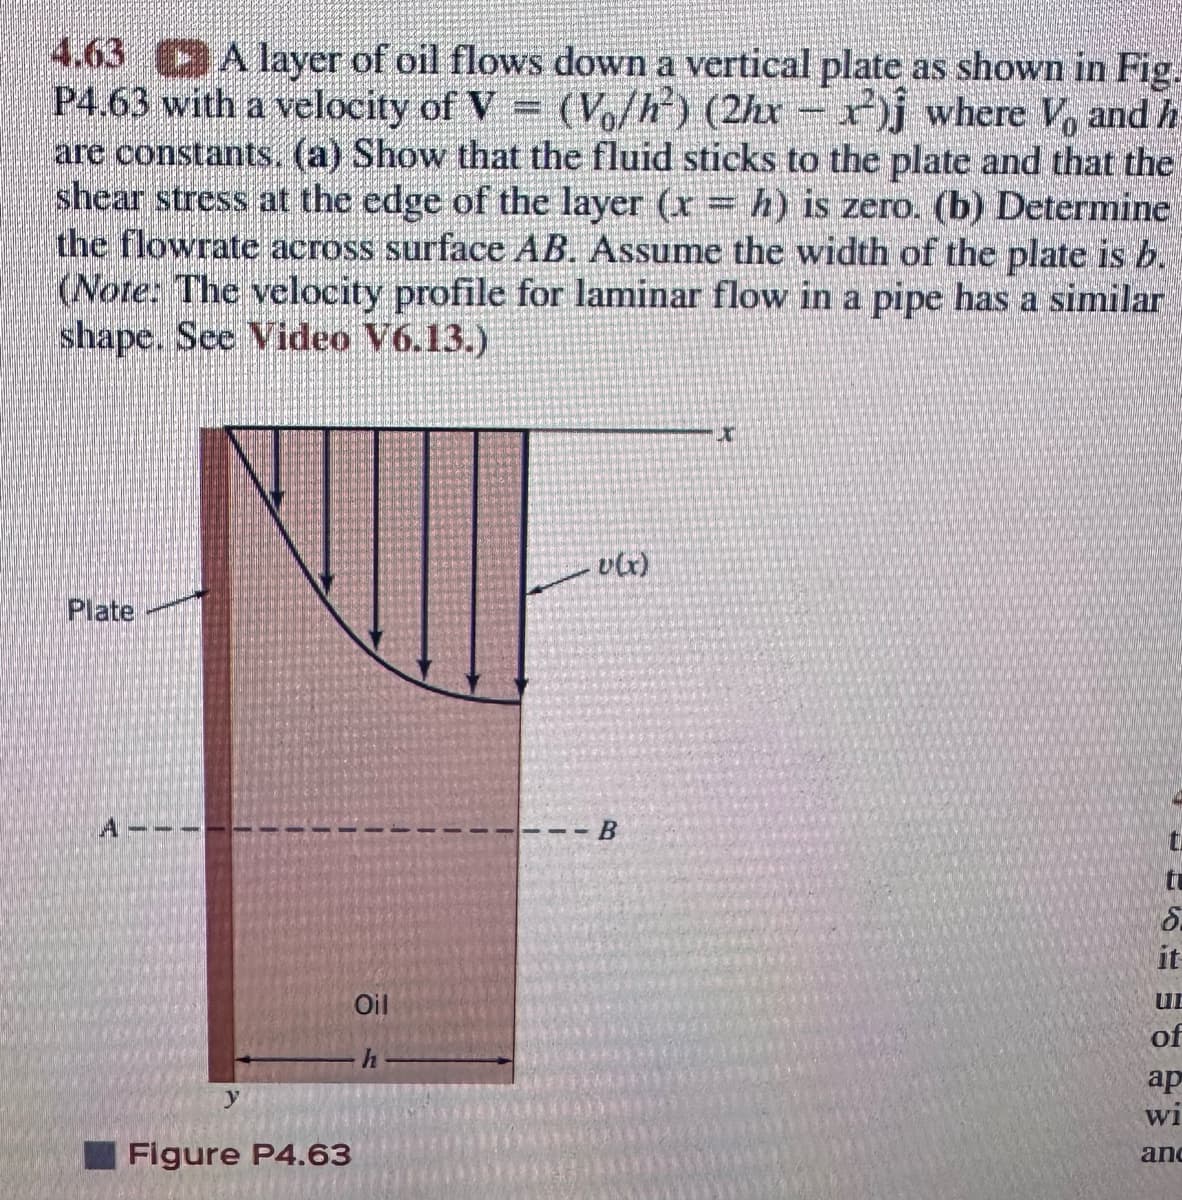 4.63 A layer of oil flows down a vertical plate as shown in Fig.
P4.63 with a velocity of V = (Vo/h²) (2hx − ²) where V, and h
are constants. (a) Show that the fluid sticks to the plate and that the
shear stress at the edge of the layer (x = h) is zero. (b) Determine
the flowrate across surface AB. Assume the width of the plate is b.
(Note: The velocity profile for laminar flow in a pipe has a similar
shape. See Video V6.13.)
QUE
Plate
y
Figure P4.63
Oil
h
v(x)
---B
X
tu
5.
it
UL
of
ap
Wi
anc